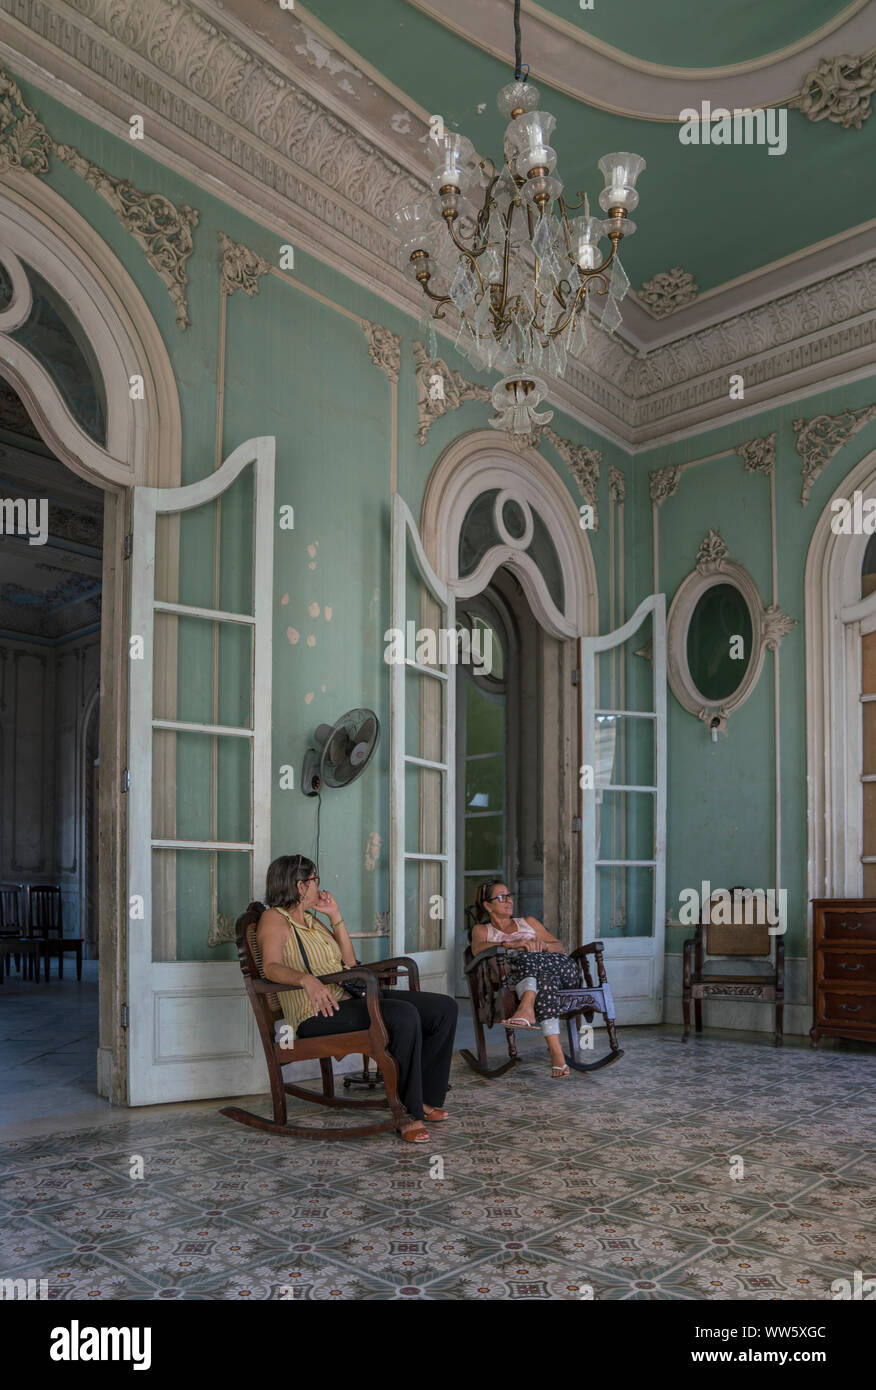 Palacio Ferrer was built in 1917-18 by Spanish squire JosÃ© Ferrer, Today the building is open for the public, The image showing a room of the Palacio with interior arrangement and two 'museum attendants' in the rocking chair, Cienfuegos, Cuba Stock Photo